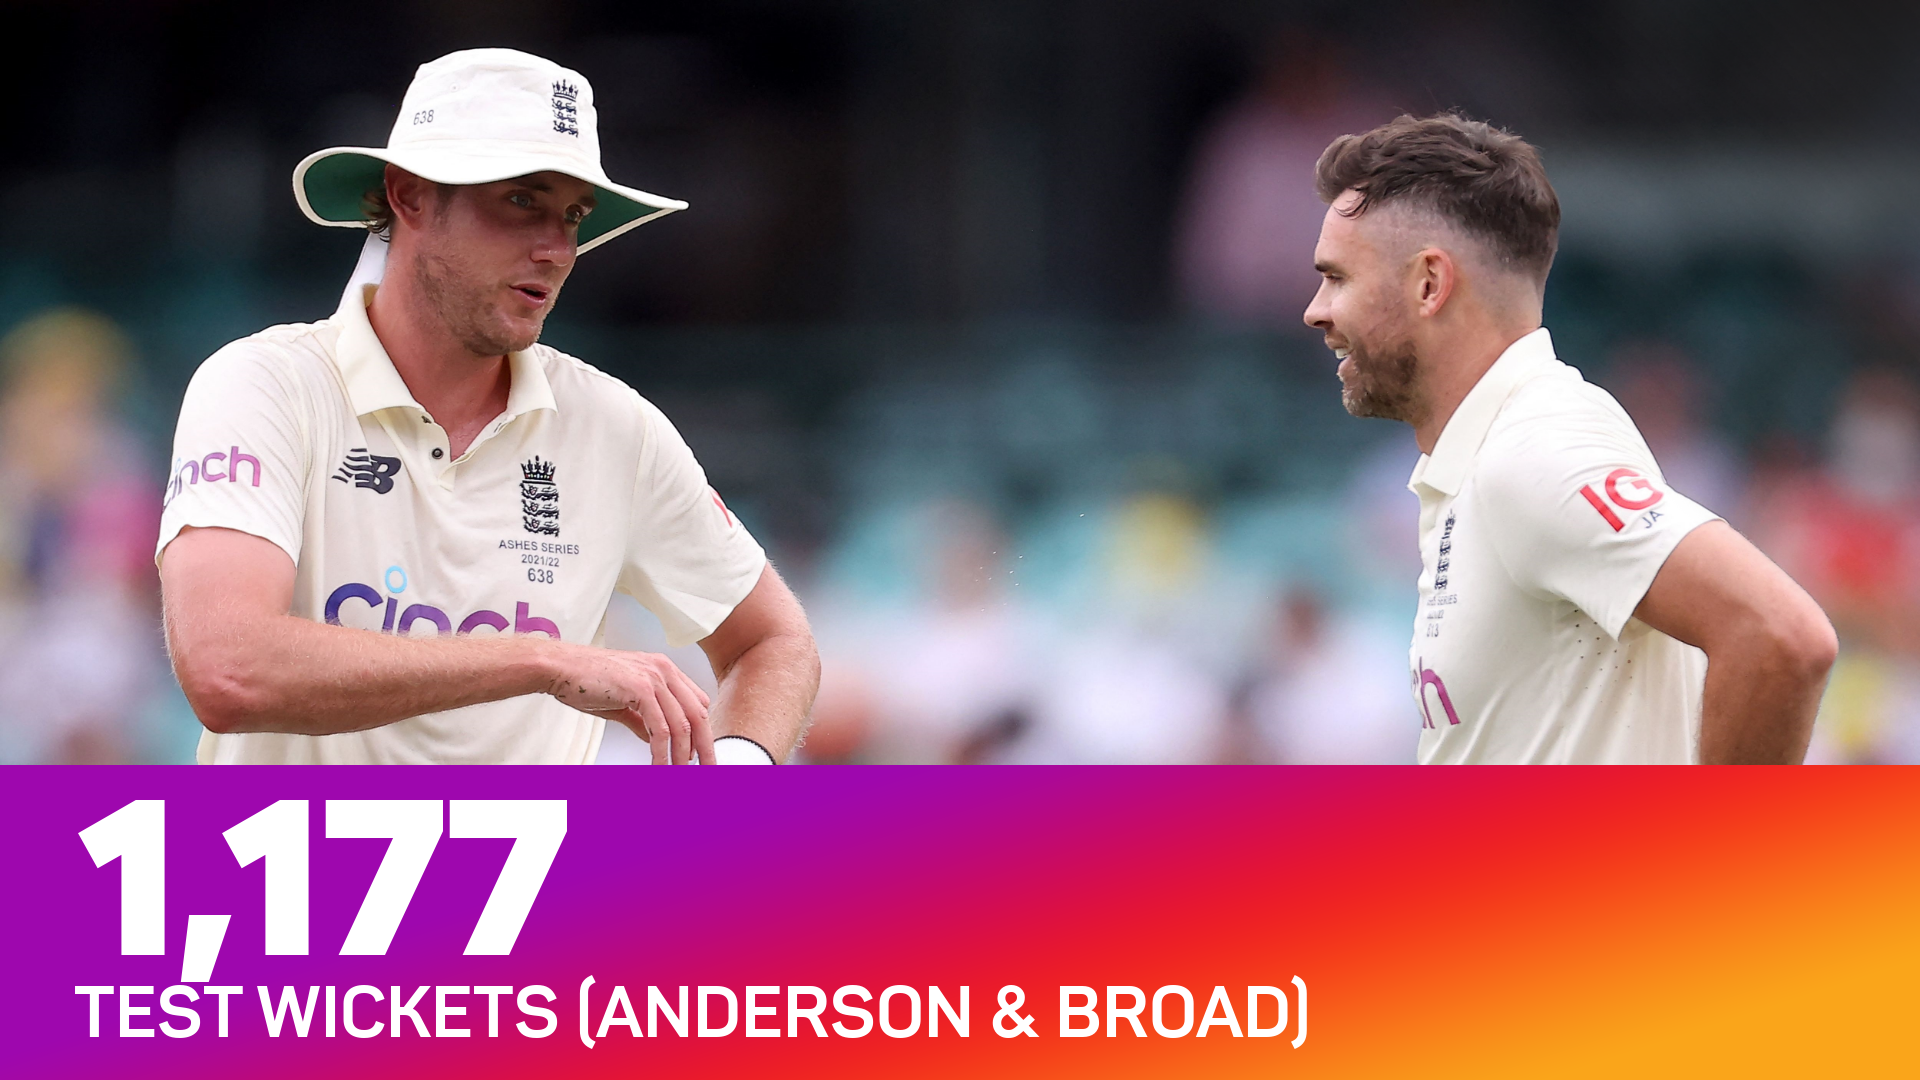 Stuart Broad and James Anderson have taken 1,177 Test wickets between them